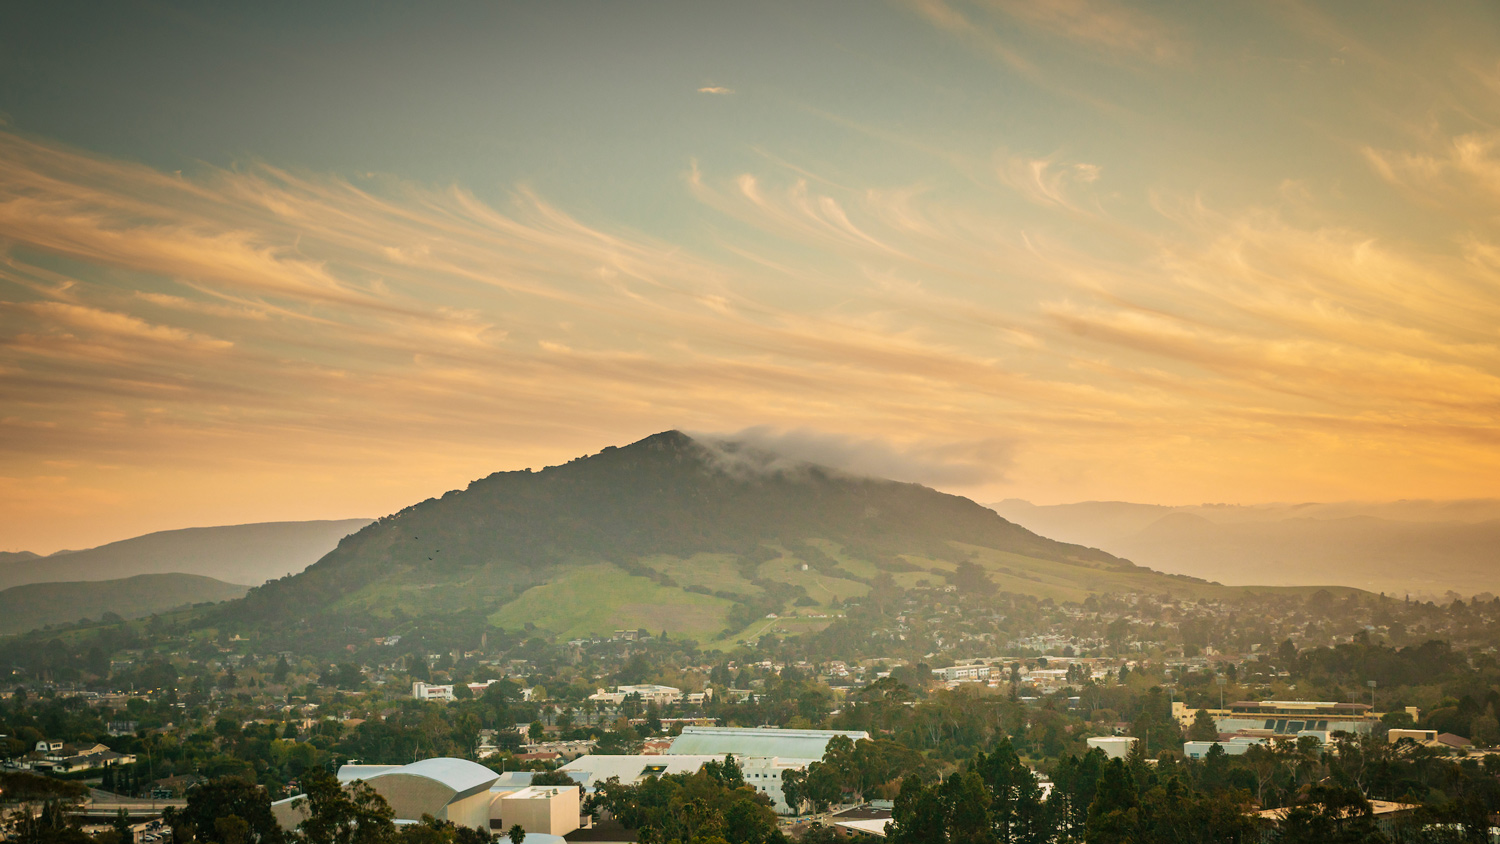 A sunset sky over a mountain with the Cal Poly campus in the foothills